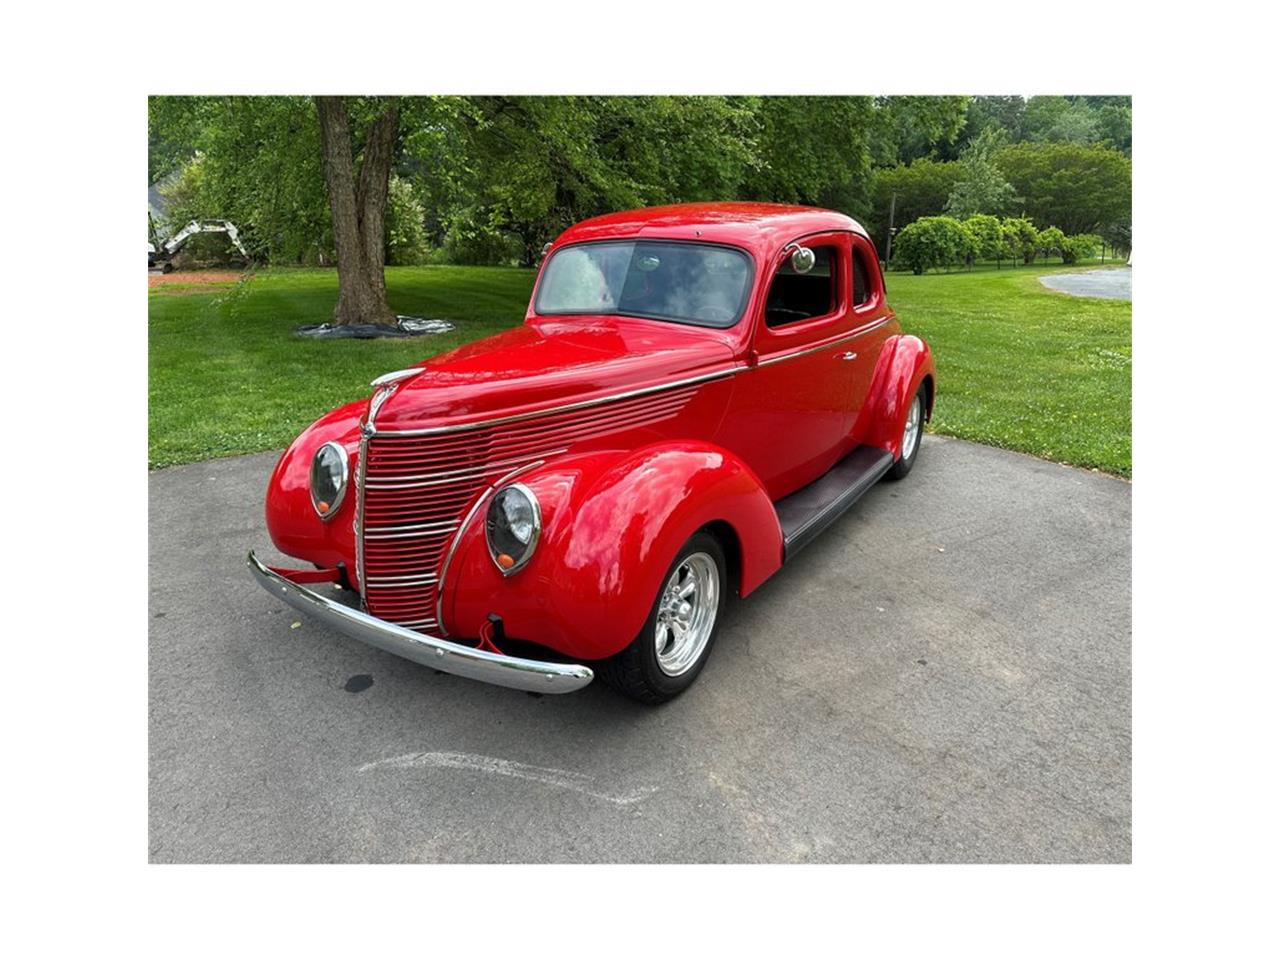 For Sale at Auction: 1938 Ford Coupe in Greensboro, North Carolina for sale in Greensboro, NC